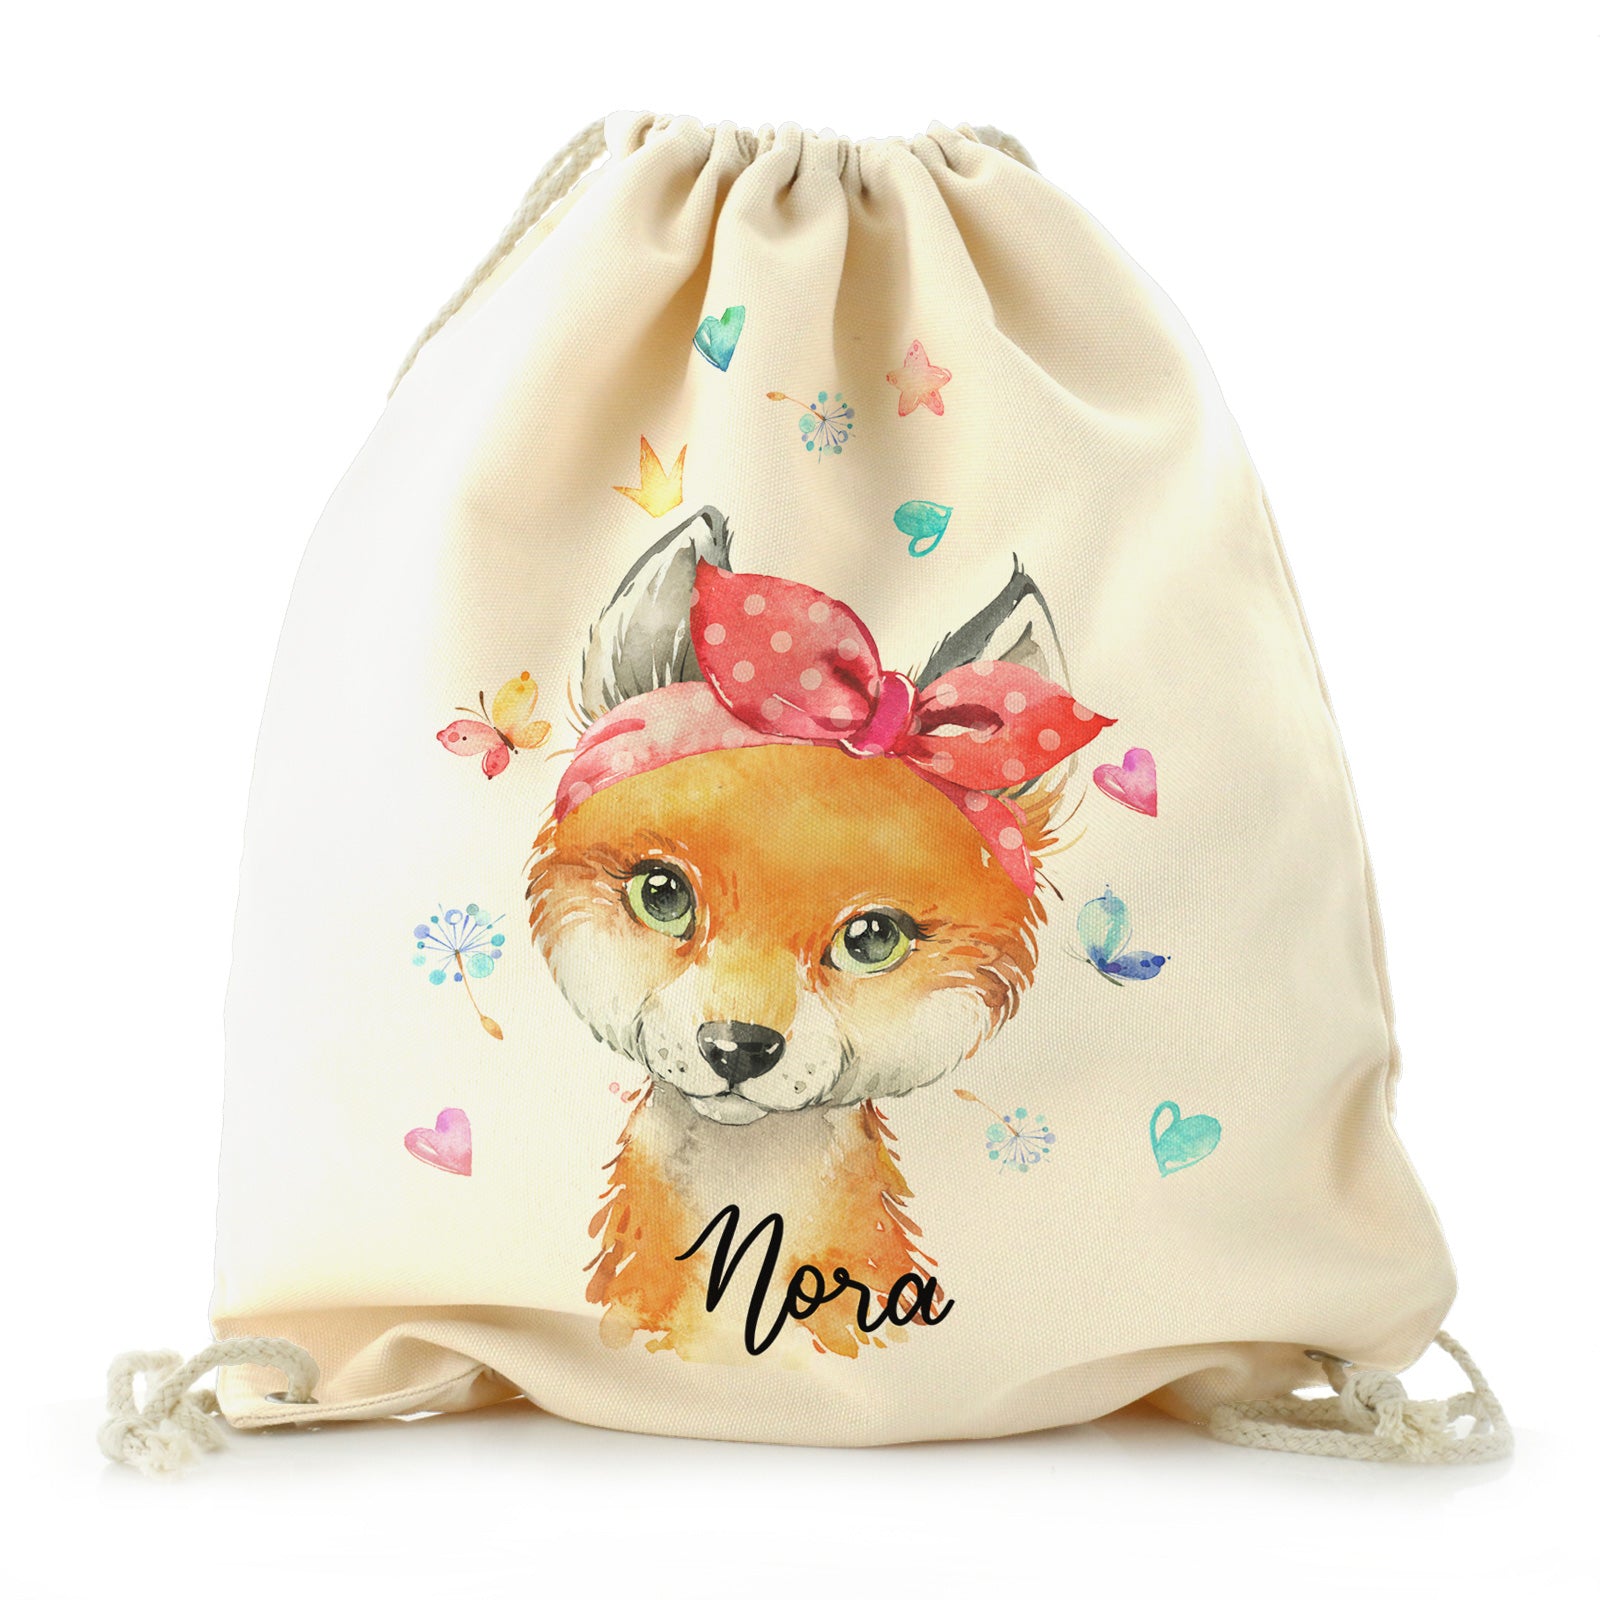 Personalised Canvas Drawstring Backpack with Red Fox with Hearts Dandelion Butterflies and Cute Text